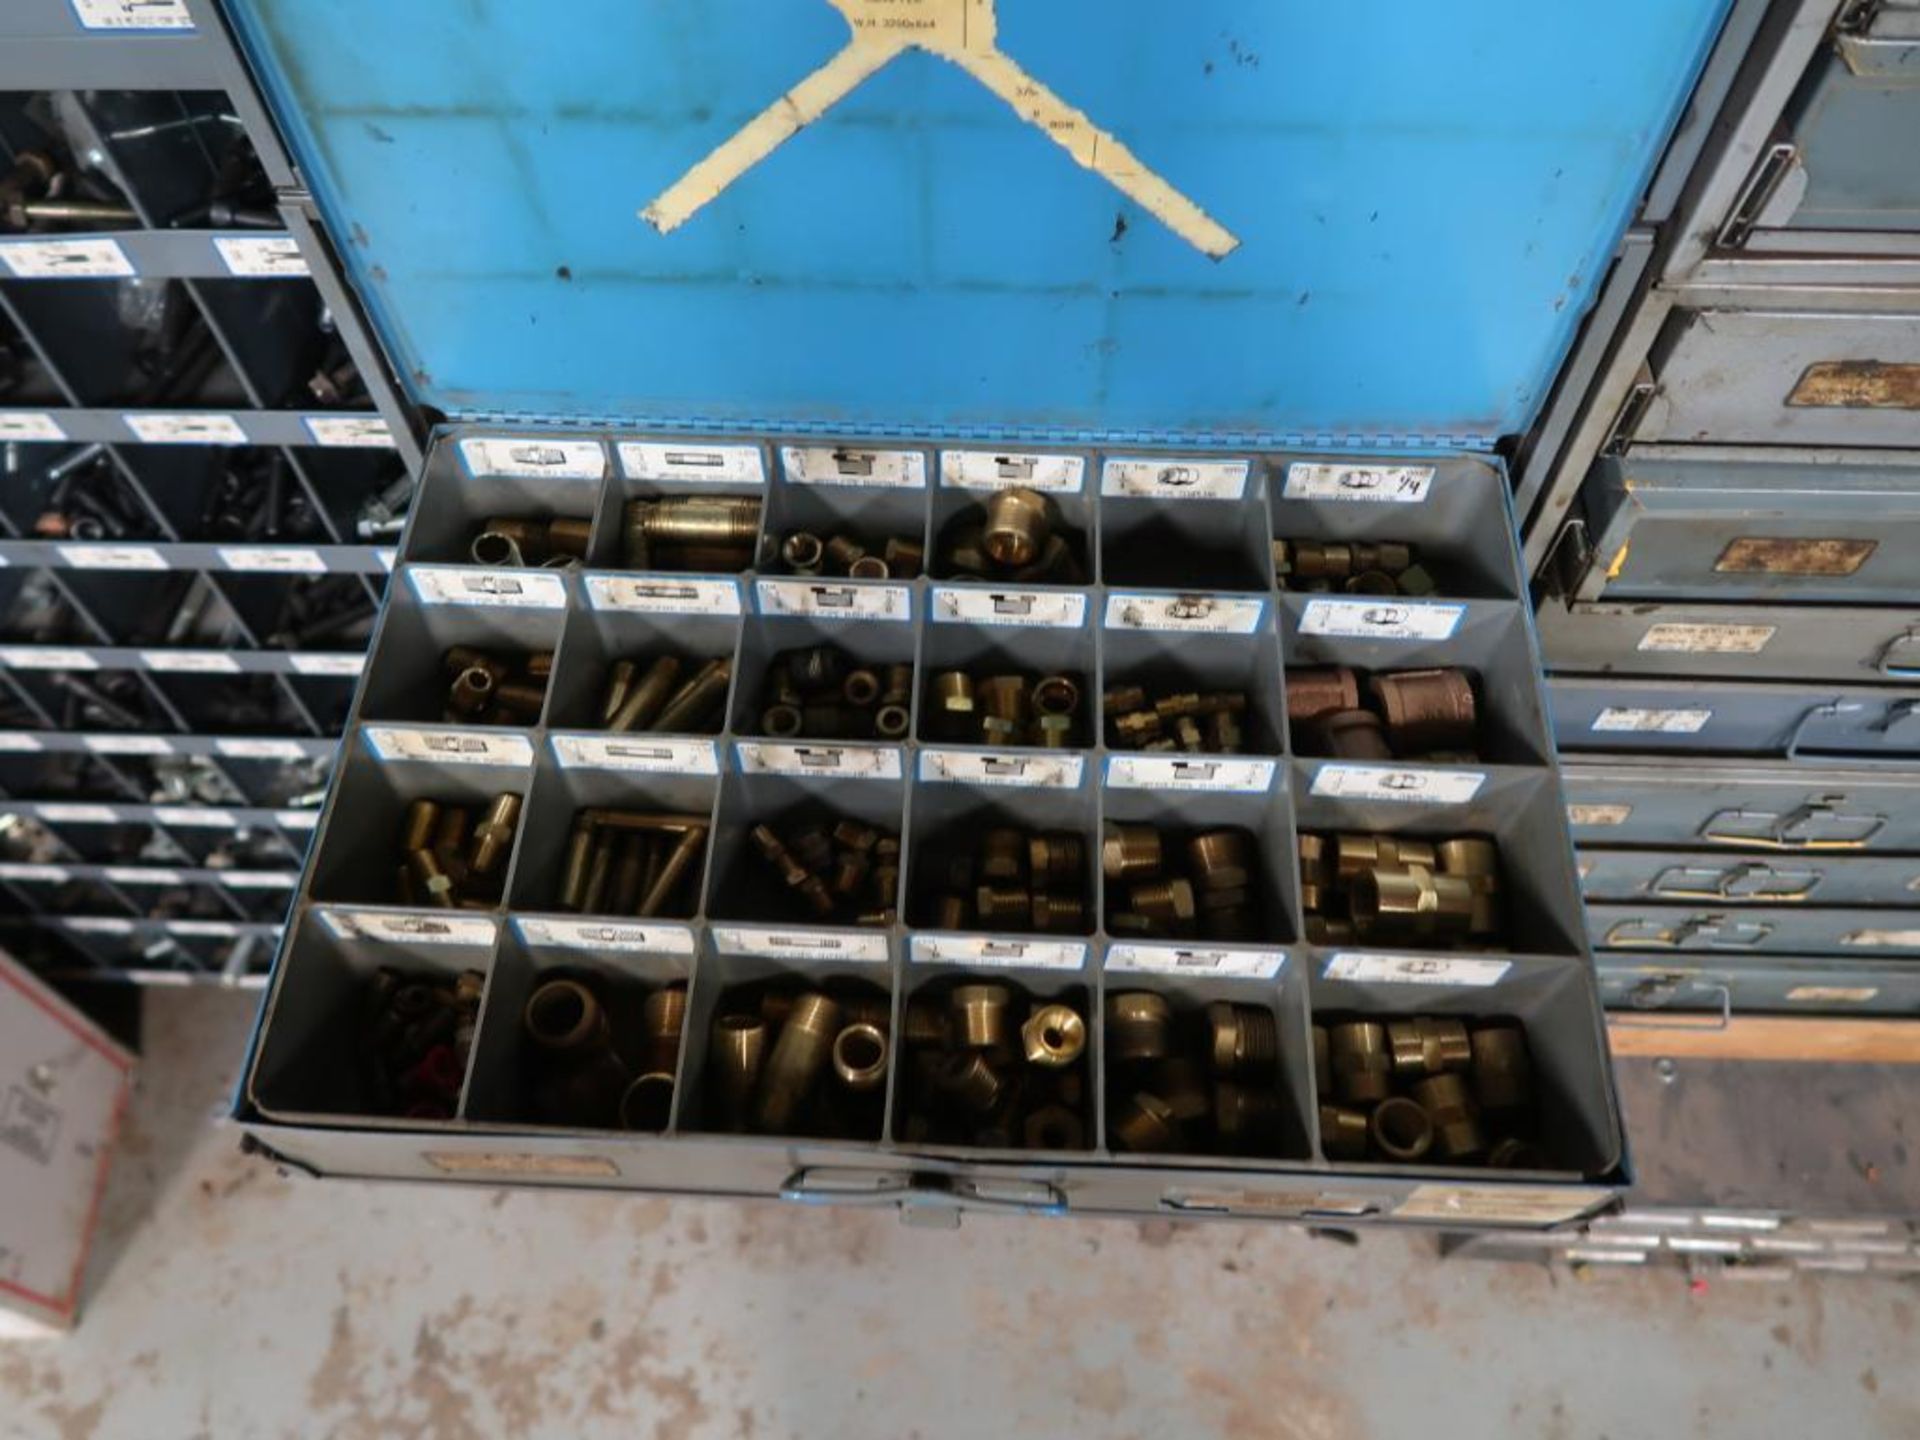 LOT: Large Quantity of Fasteners with Cubby Hole Shelving & Drawers - Image 3 of 7